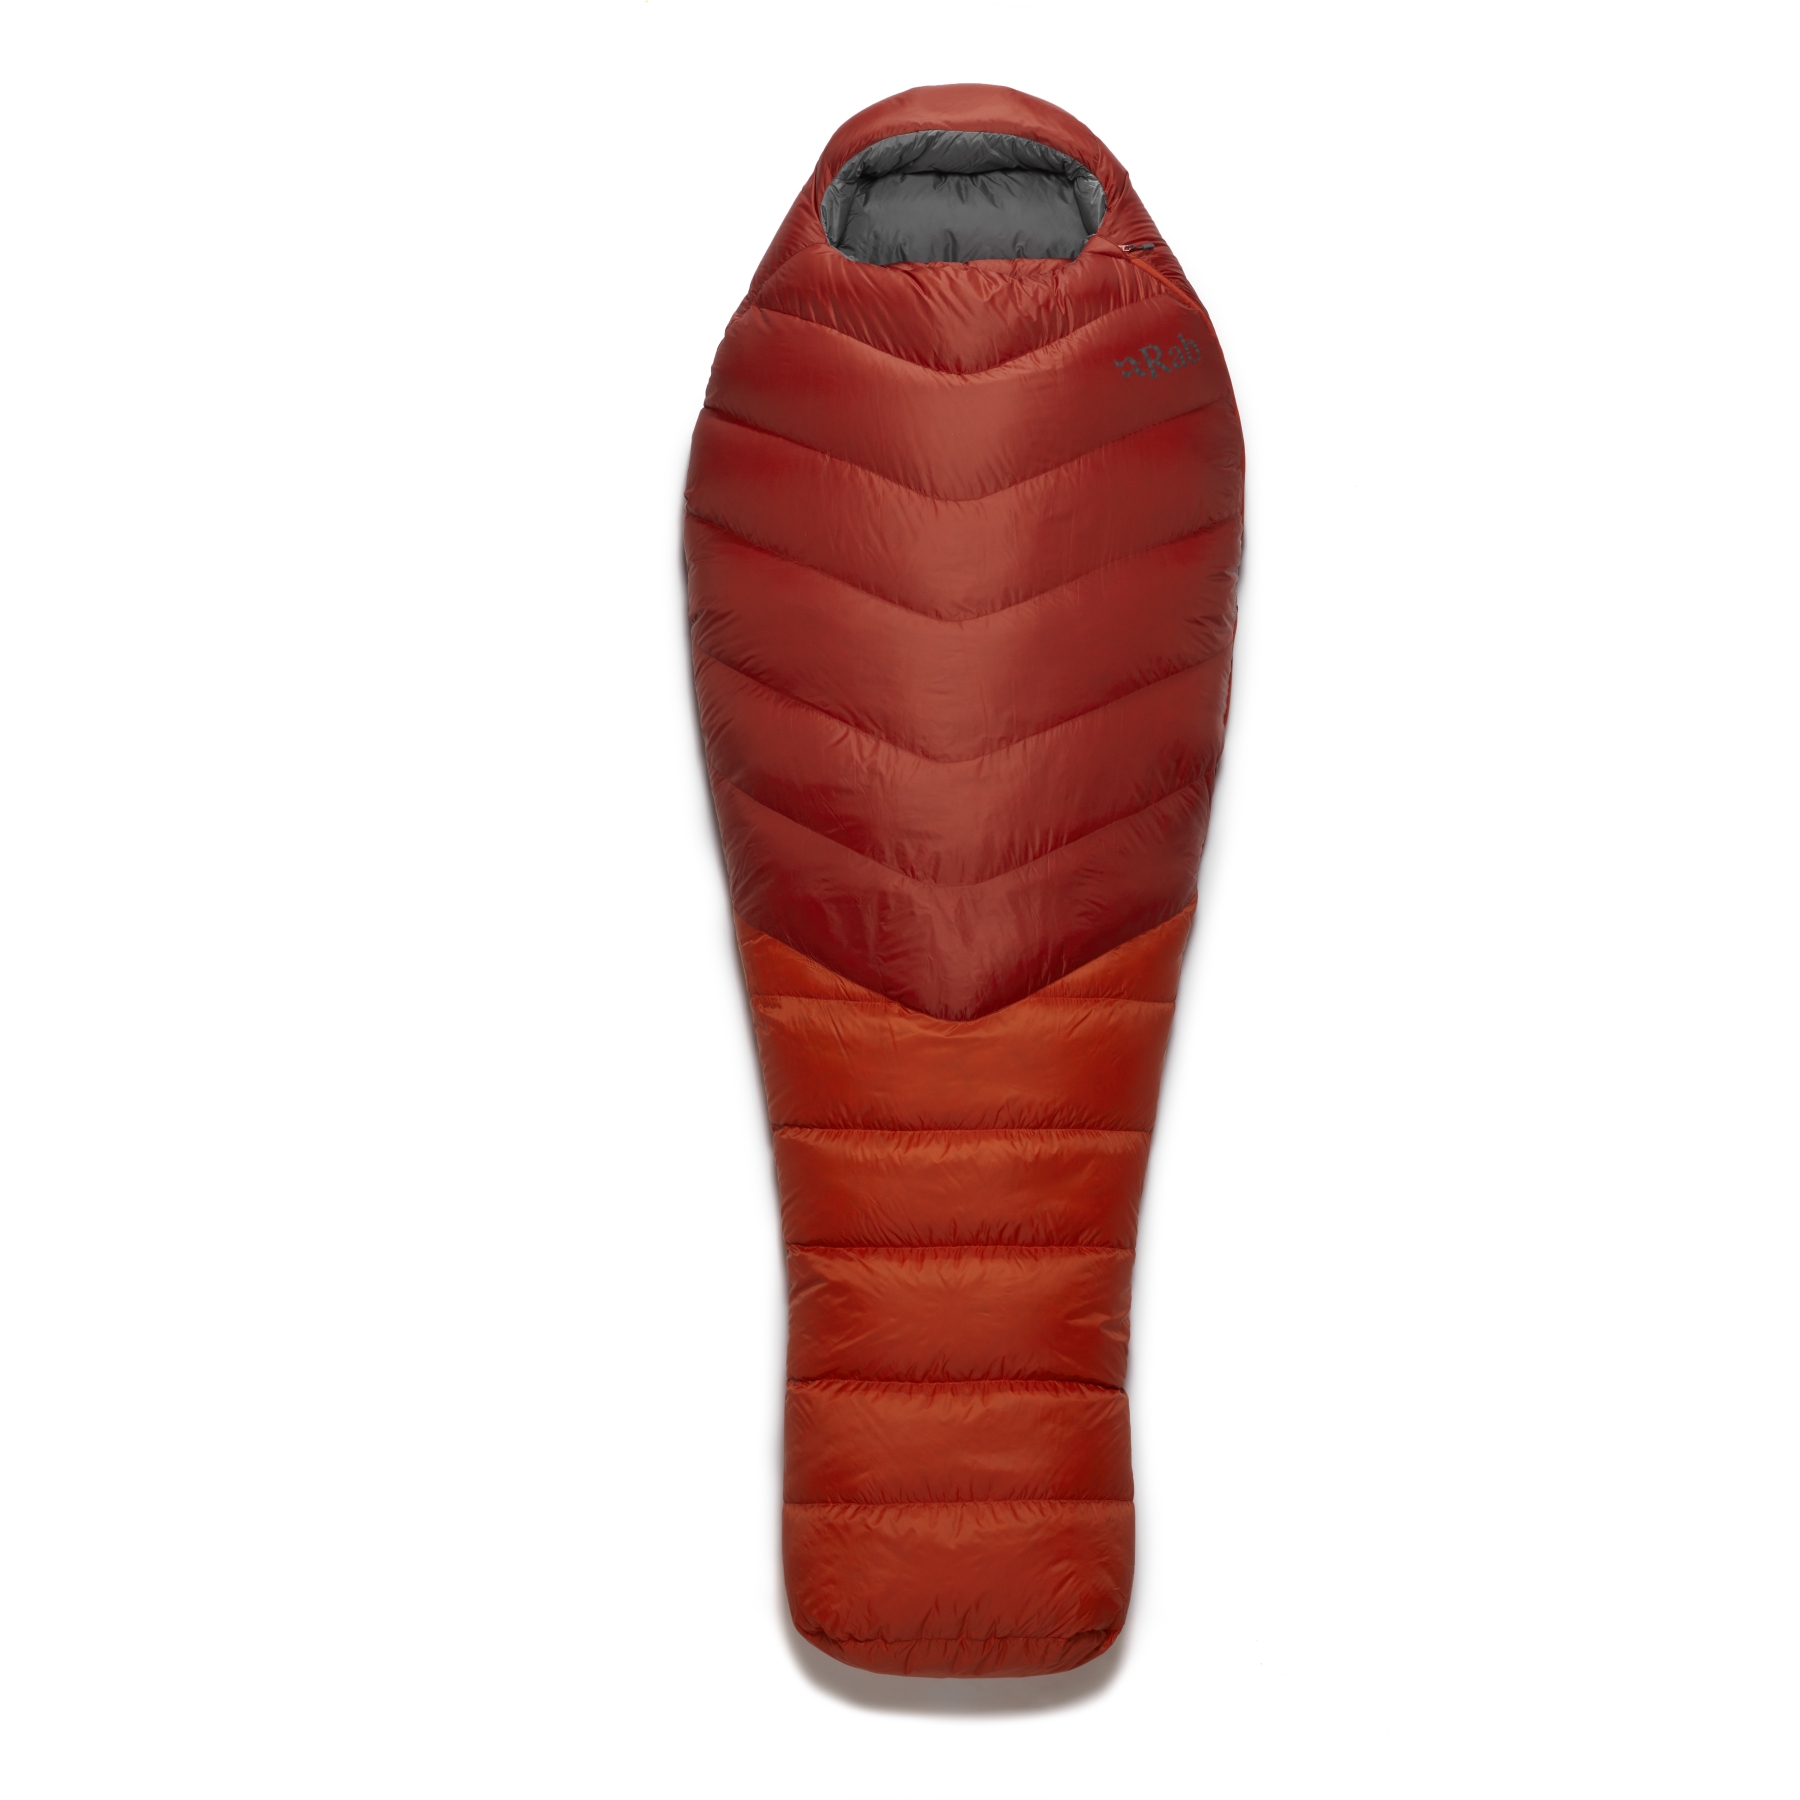 Picture of Rab Alpine 600 Down Sleeping Bag - Zipper left - red clay